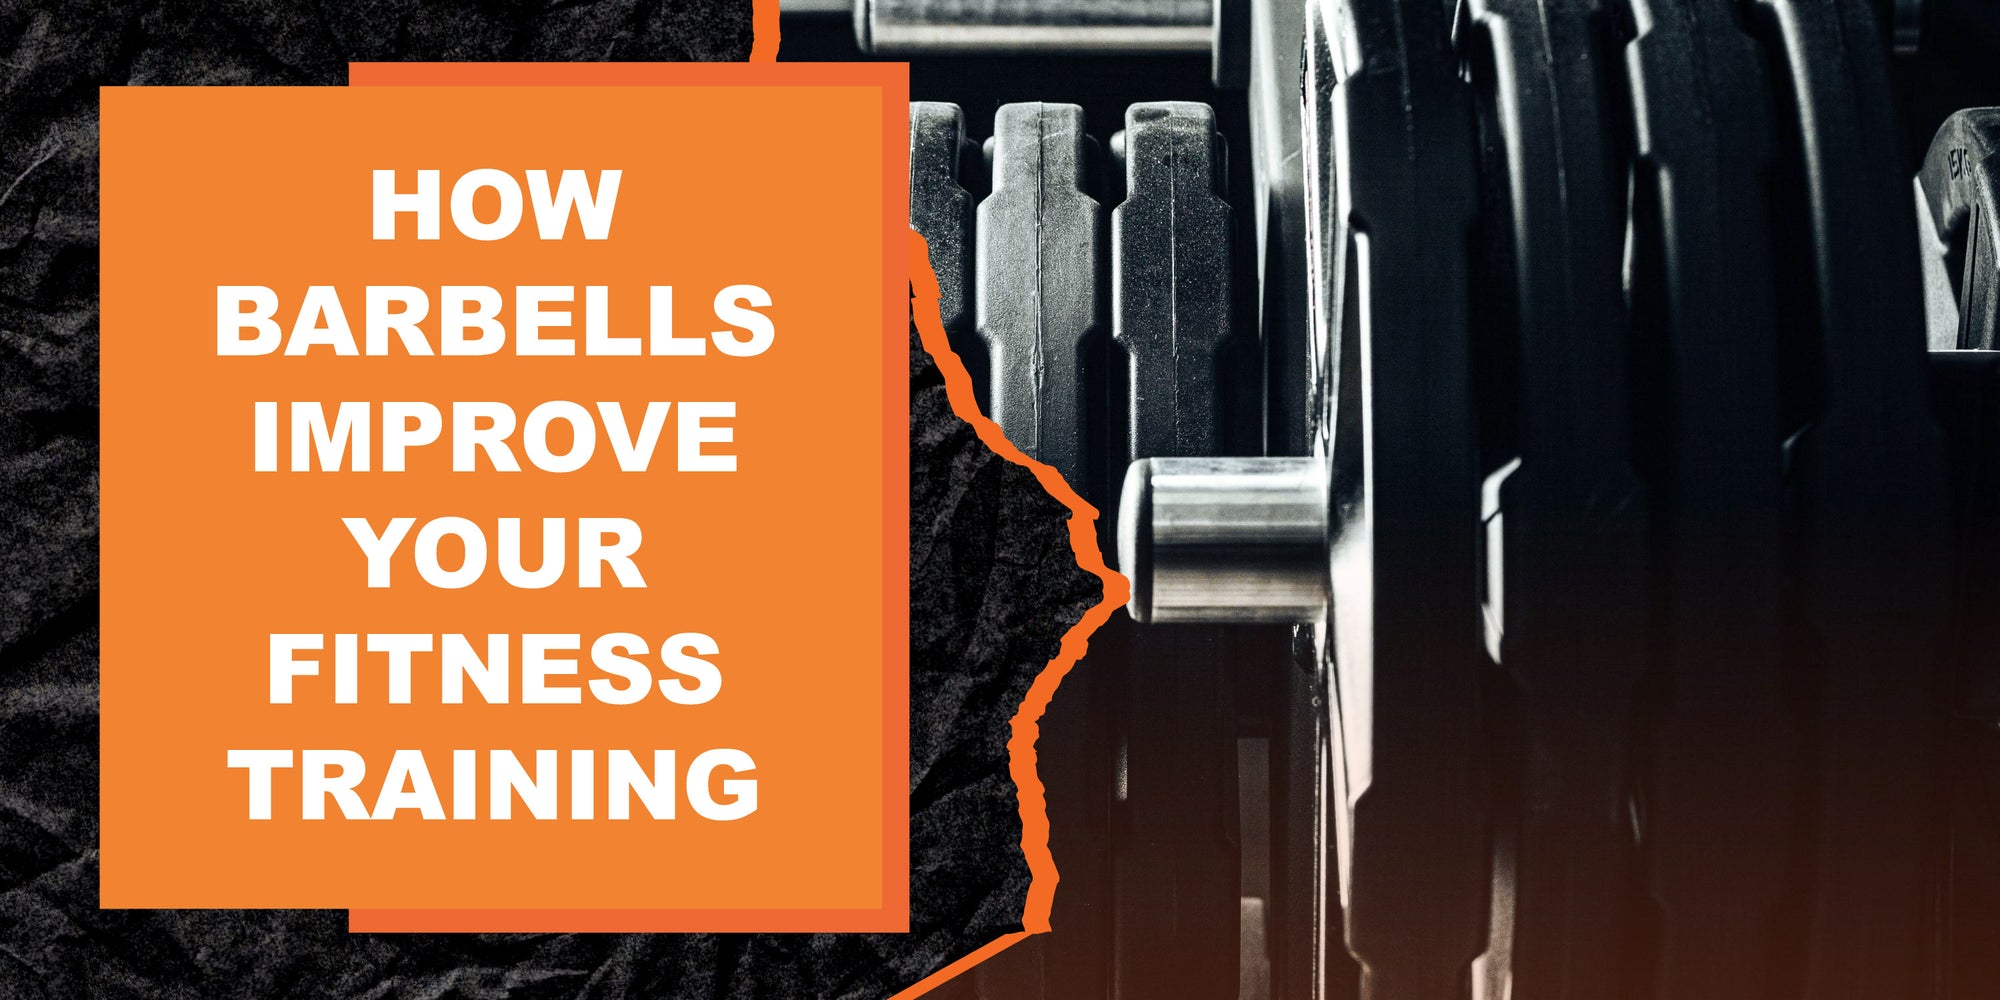 How Barbells Improve Your Fitness Training